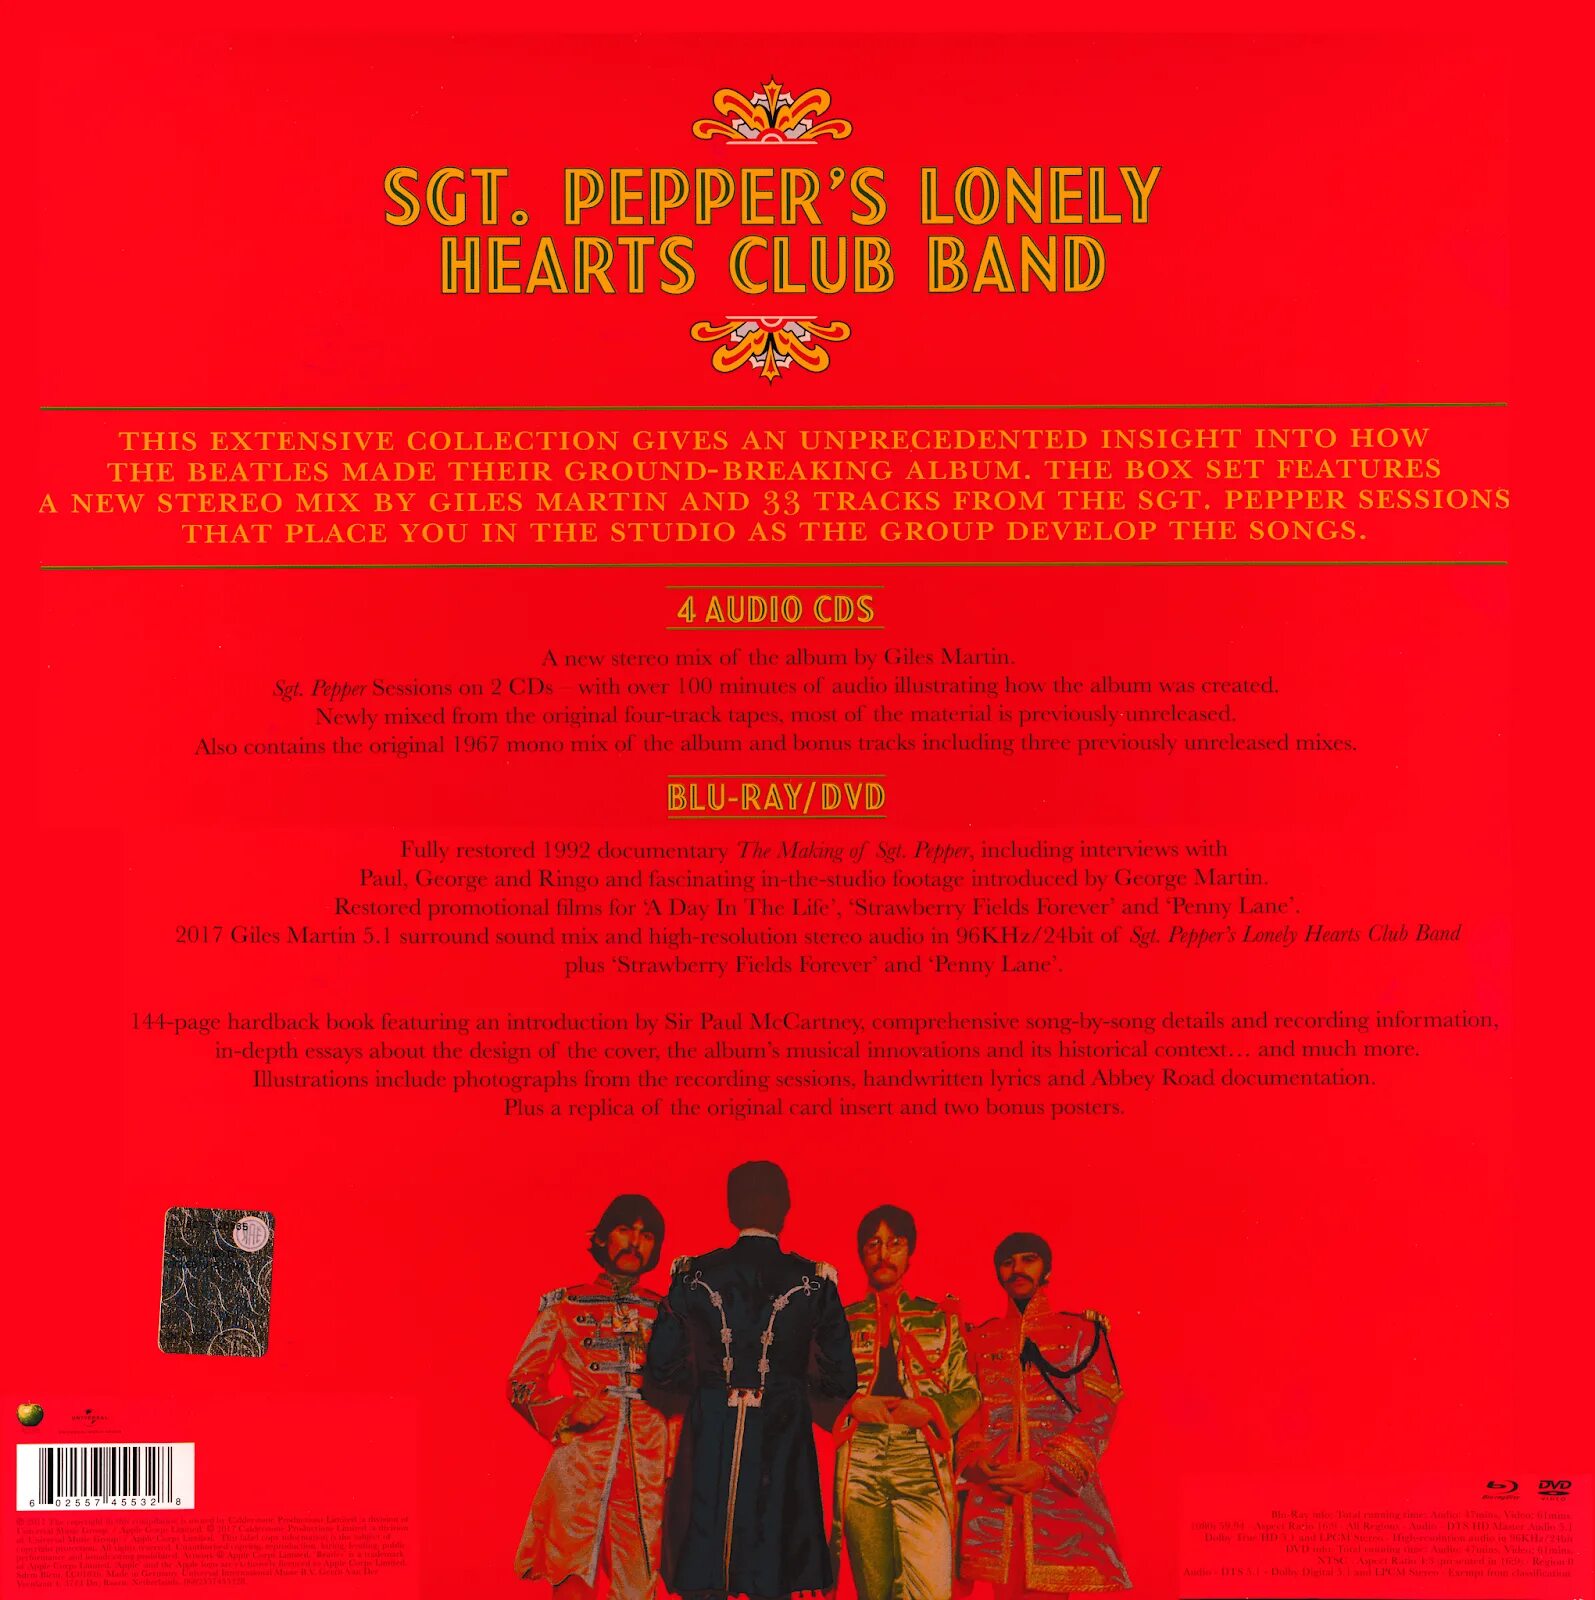 Sgt. Pepper’s Lonely Hearts Club Band the Beatles. Sgt Pepper's Lonely Hearts Club Band. The Beatles Sgt. Pepper's Lonely Hearts Club Band 2017. The Beatles Sgt Pepper оркестр 1967.